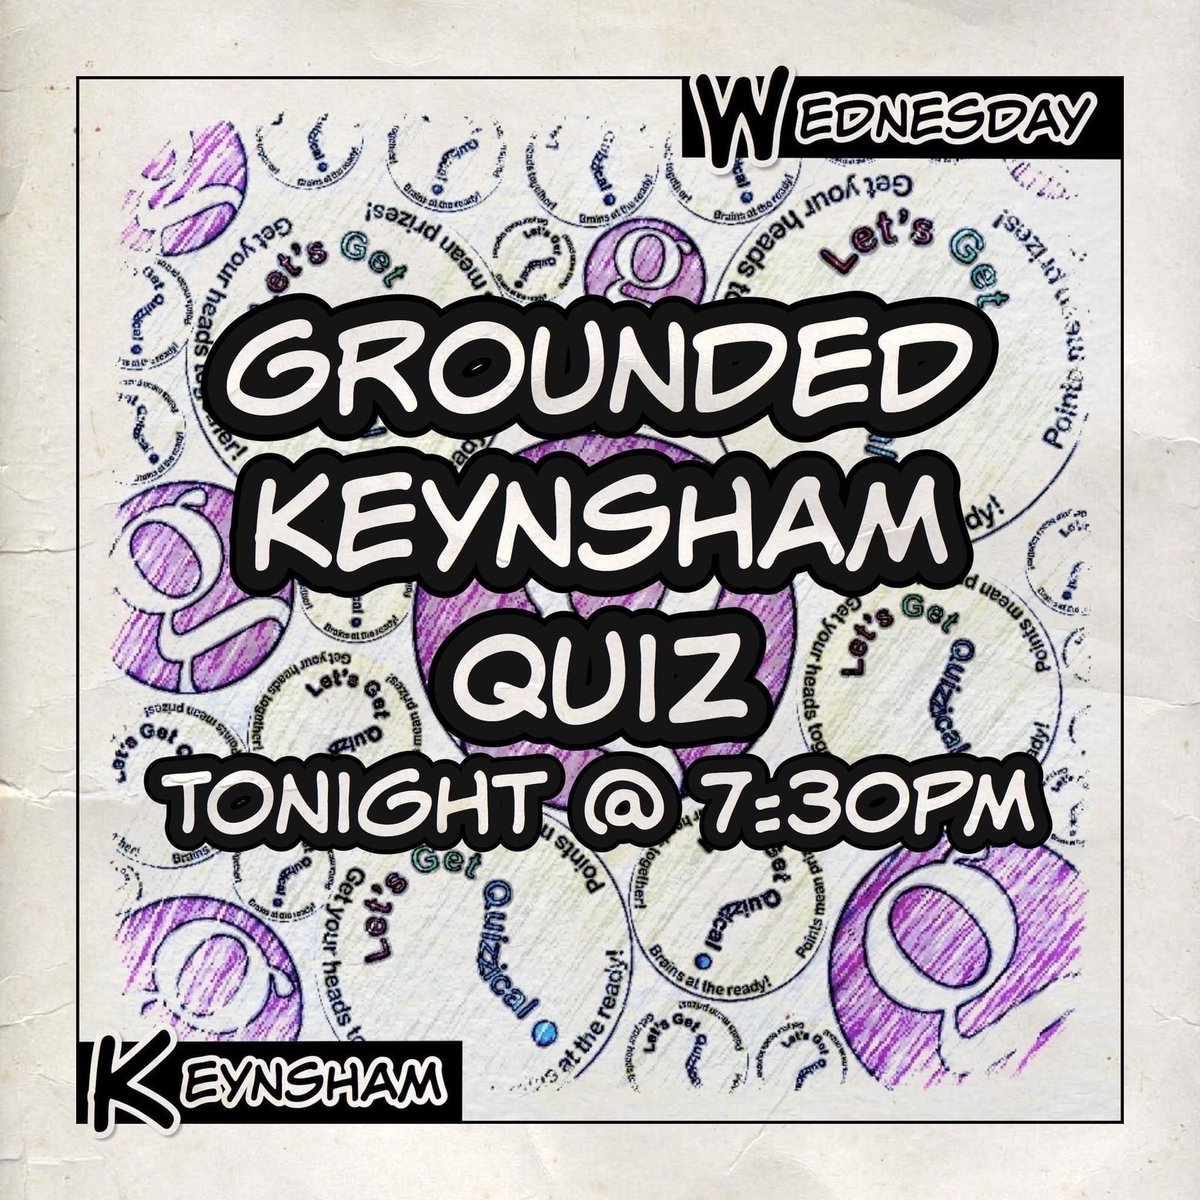 It’s #QuizNight at #Grounded #Keynsham. 7:30pm start for our #HomeNations #Quiz with pizza vouchers and wine to be won